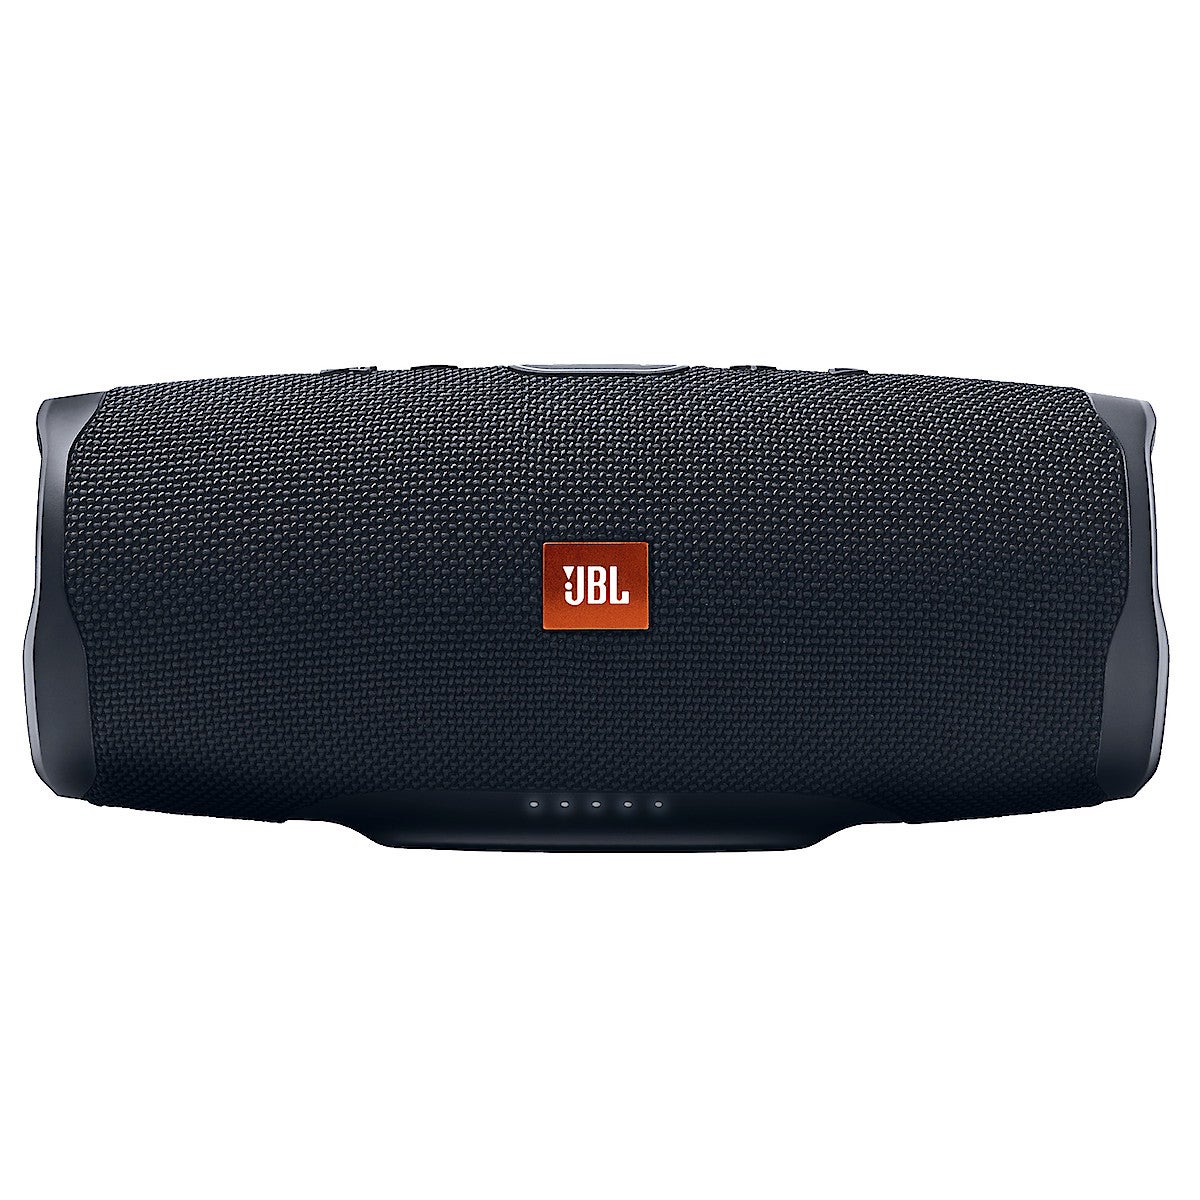 Högtalare JBL Charge 4 | Clas Ohlson